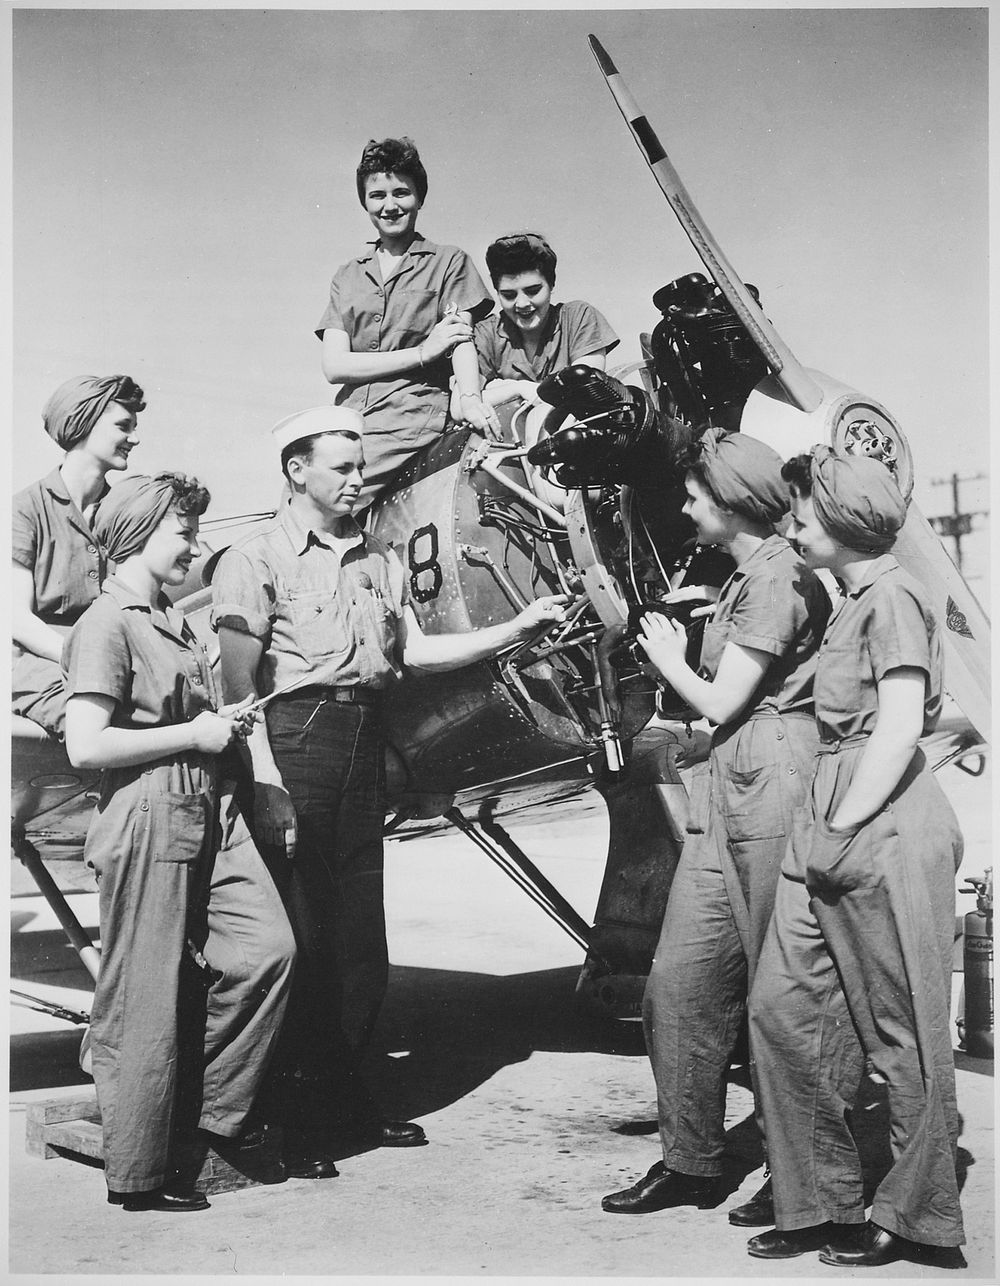 A Group of Women Prepare to Take Over Maintenance Responsibilities for Aircraft, 1940-1945. Original public domain image…